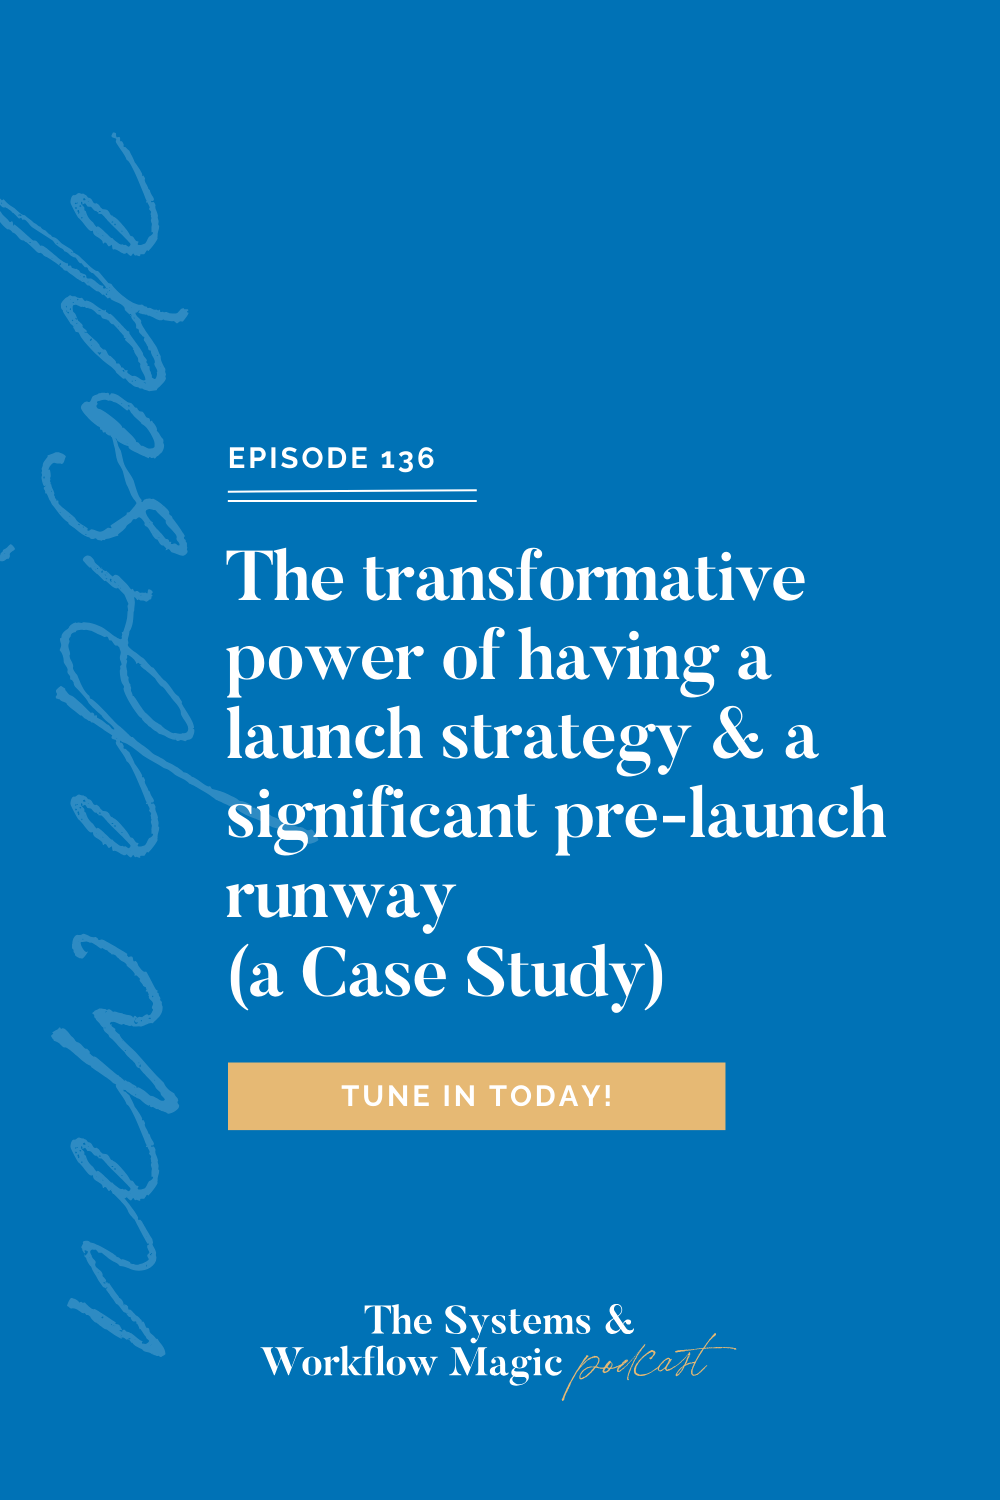 pinterest-pin-image-the-transformative-power-of-having-a-launch-strategy-and-a-significant-pre-launch-runway